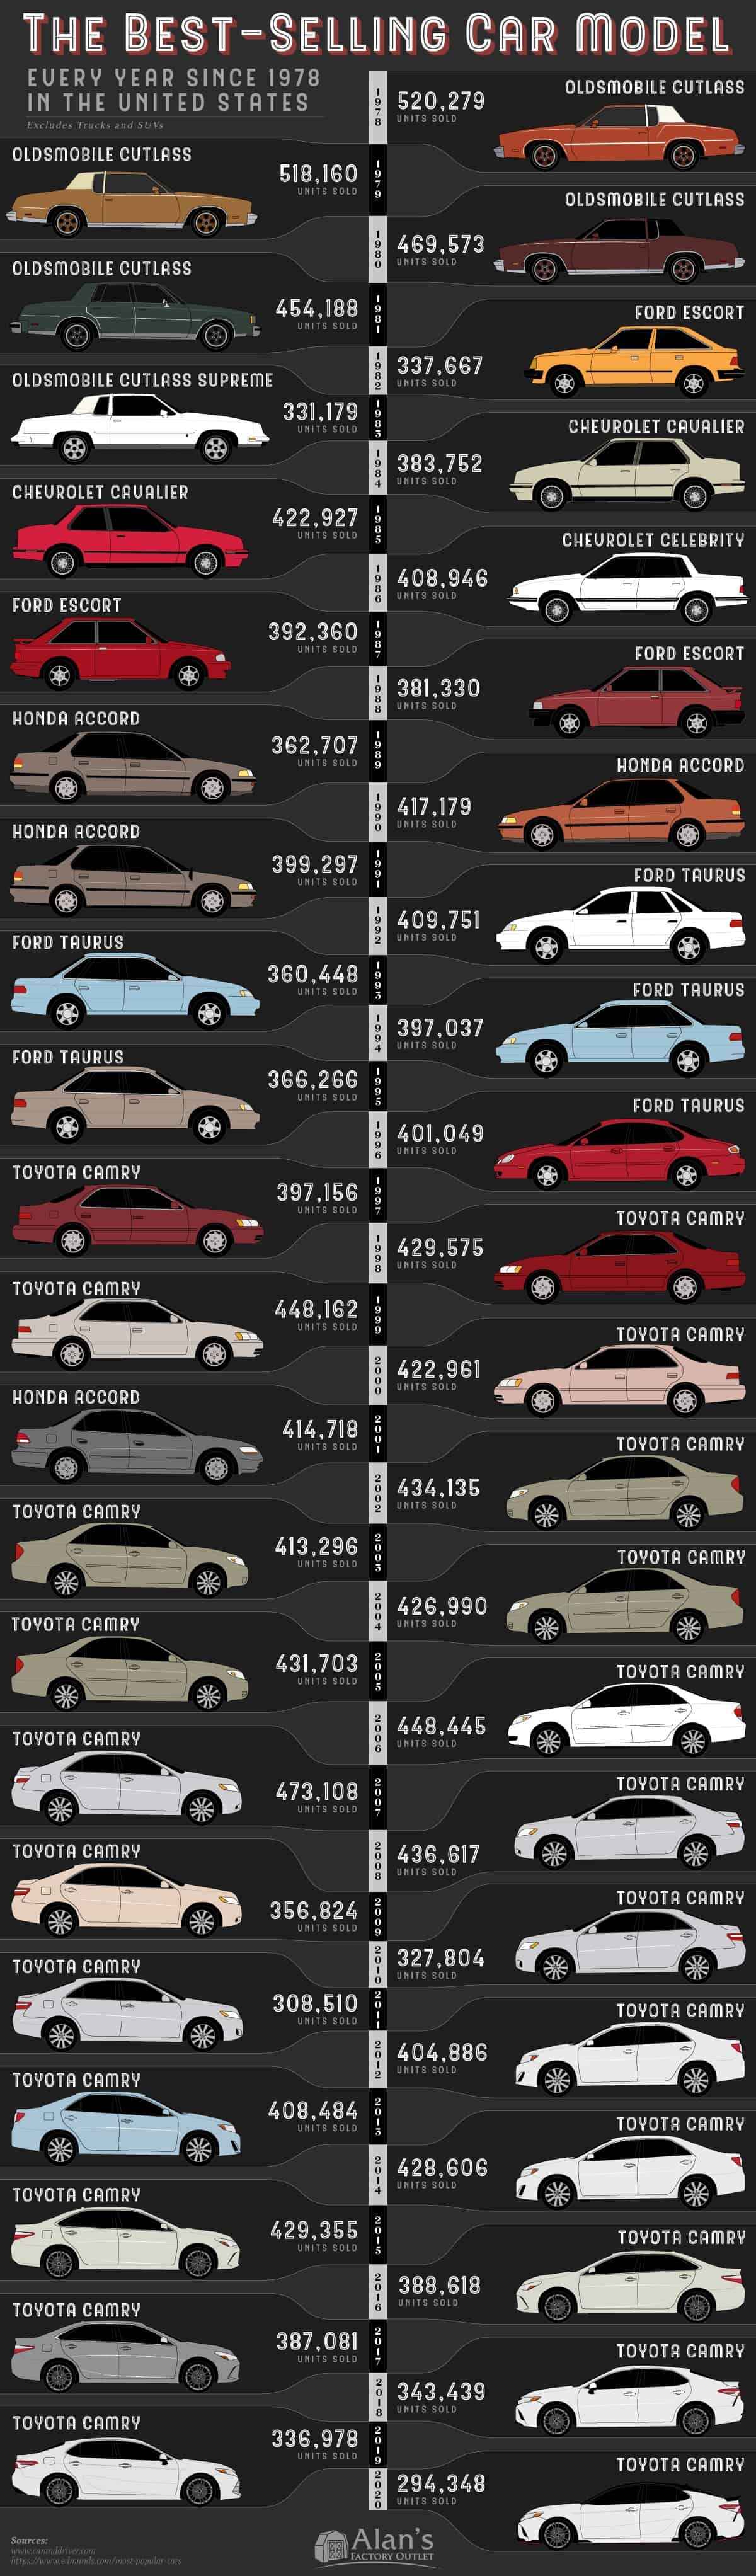 The Most Popular Car Model Every Year Since 1978 in the United States